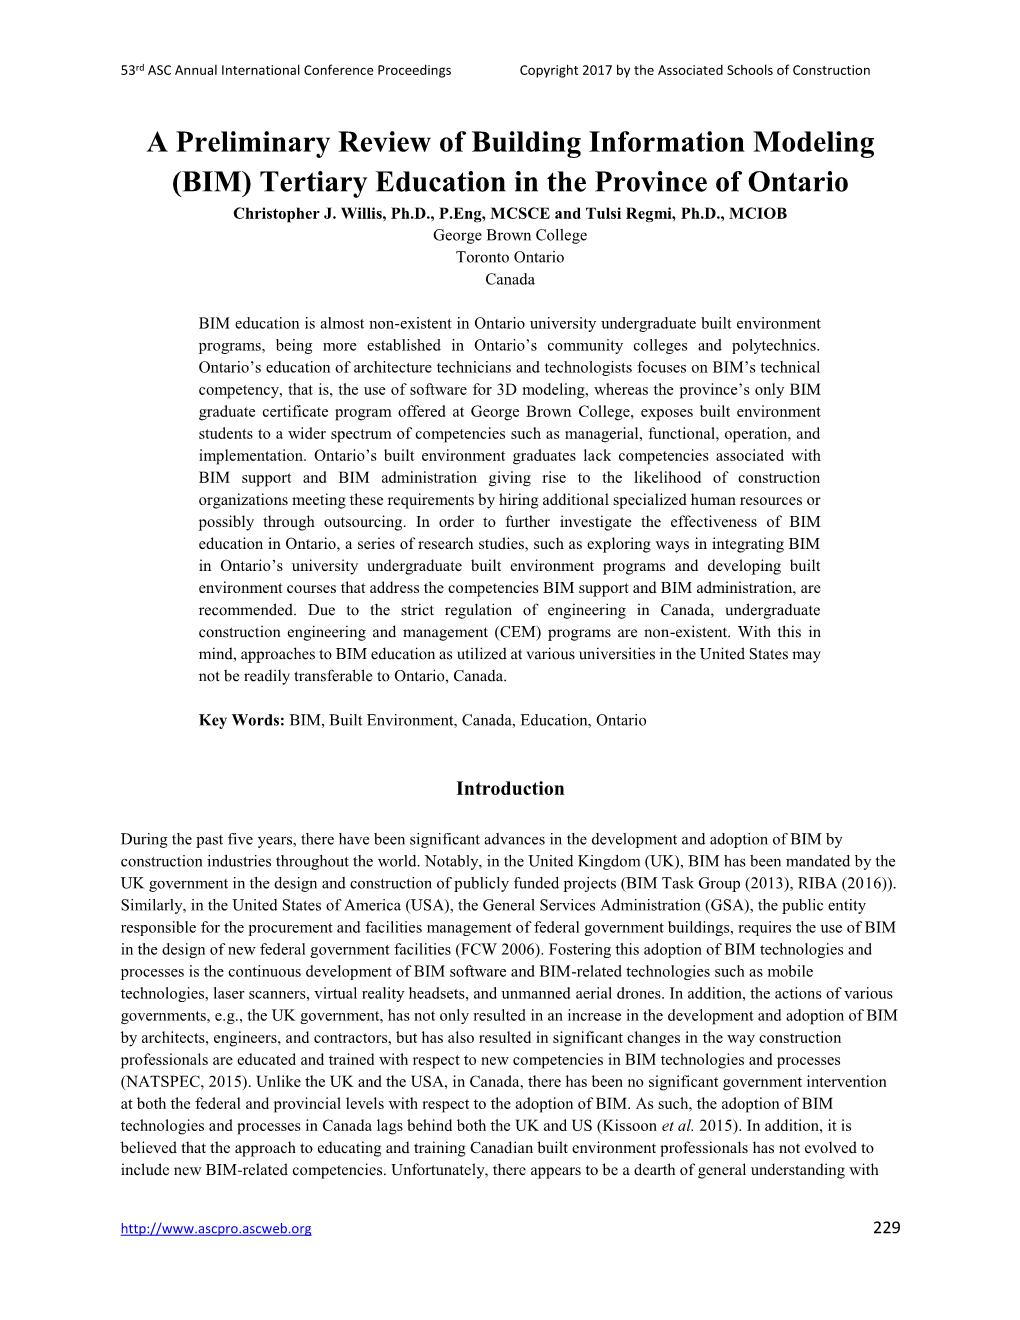 BIM) Tertiary Education in the Province of Ontario Christopher J